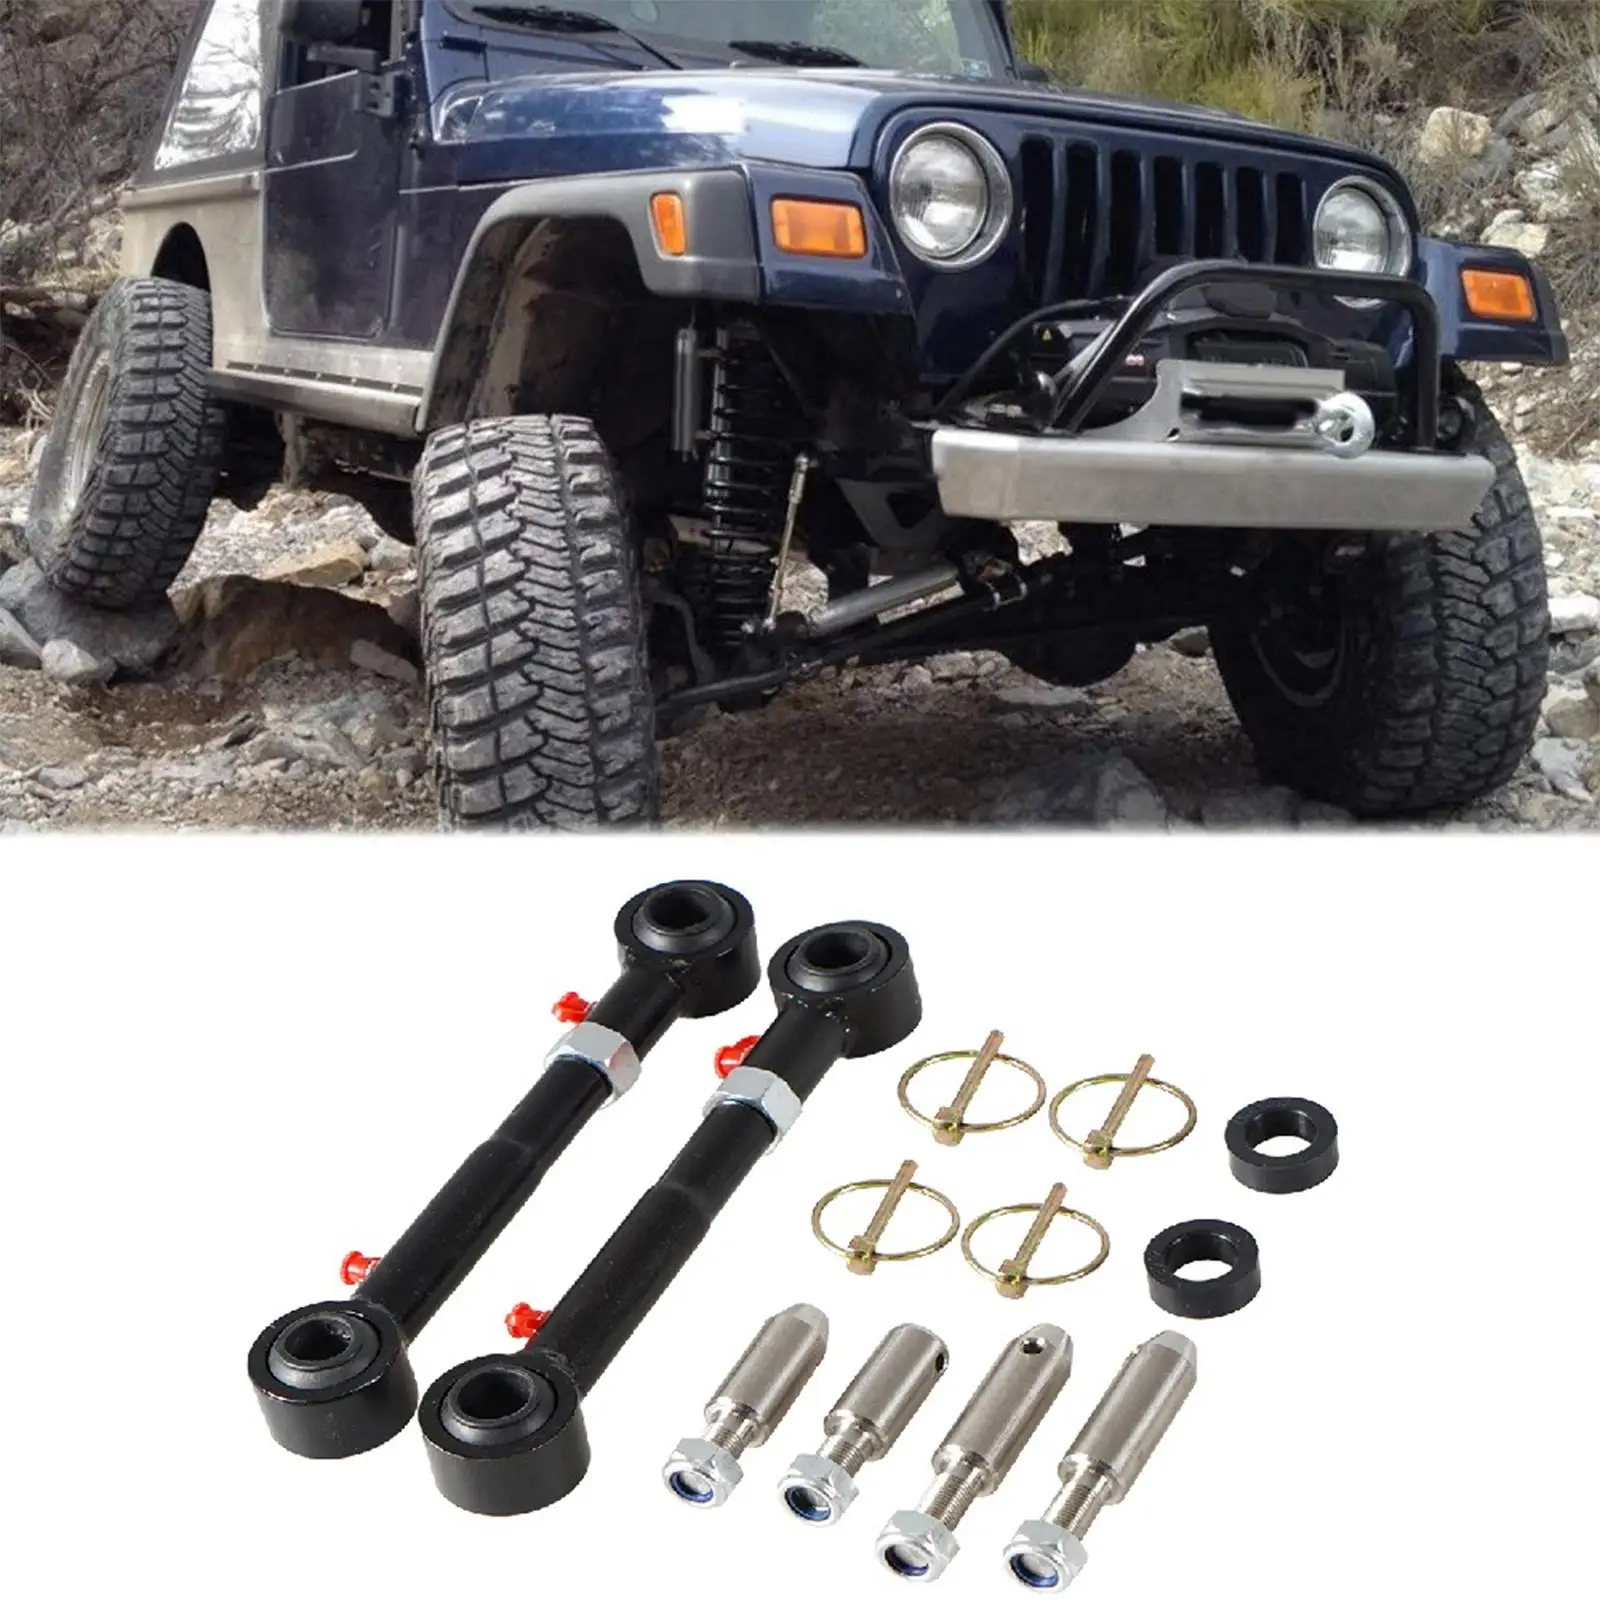 Front Sway Bar Links Disconnects Stainless Steel Fit for Jeep Wrangler JK Jku